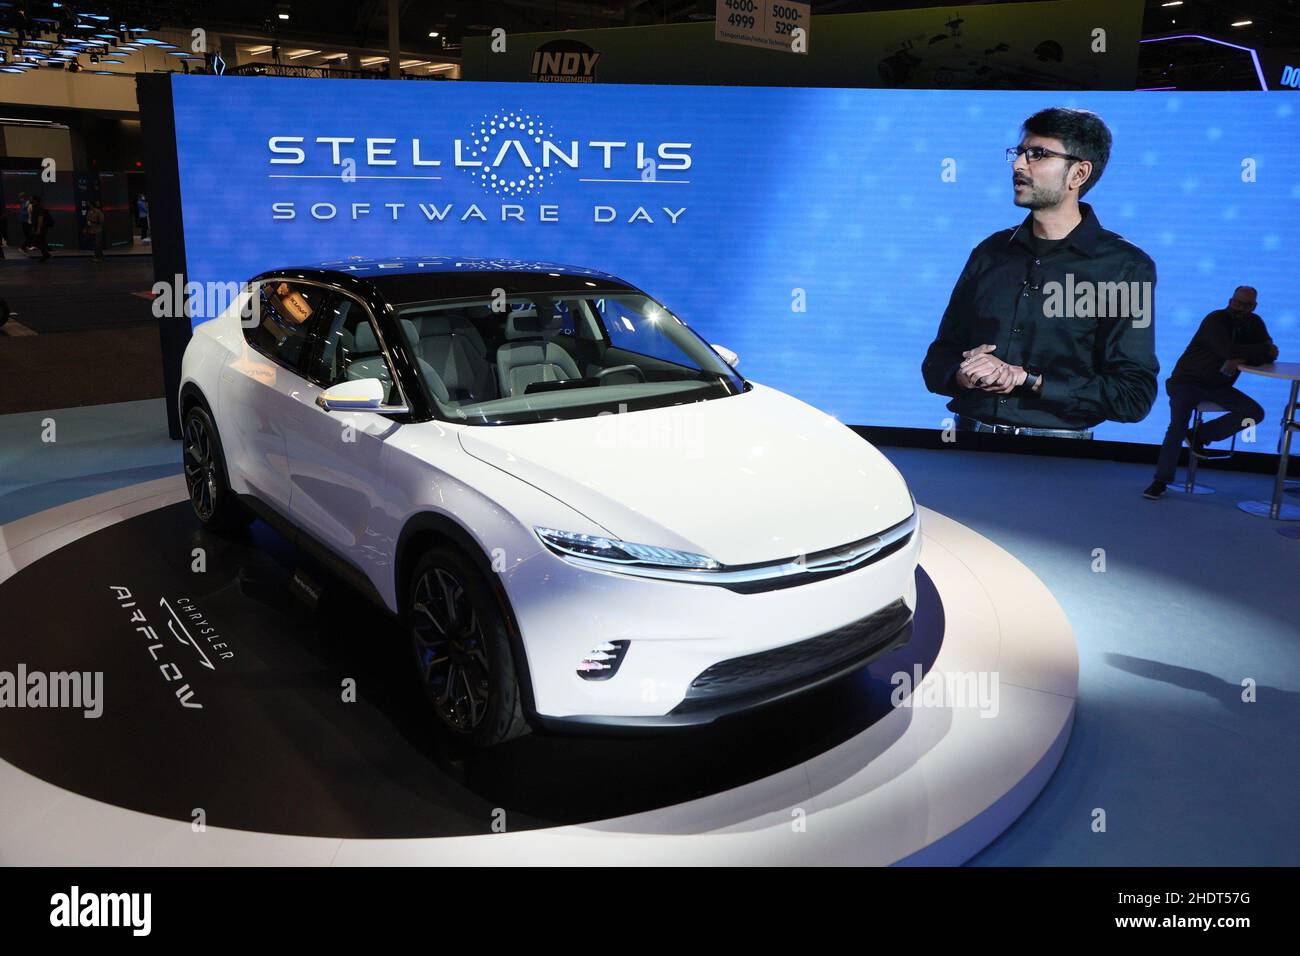 Las Vegas, NV, USA. 6th Jan, 2022. Chrysler Airflow Concept electric vehicle in attendance for International Consumer Electronics Show (CES) - THU, Mandalay Bay Convention Center, Las Vegas, NV January 6, 2022. Credit: JA/Everett Collection/Alamy Live News Stock Photo